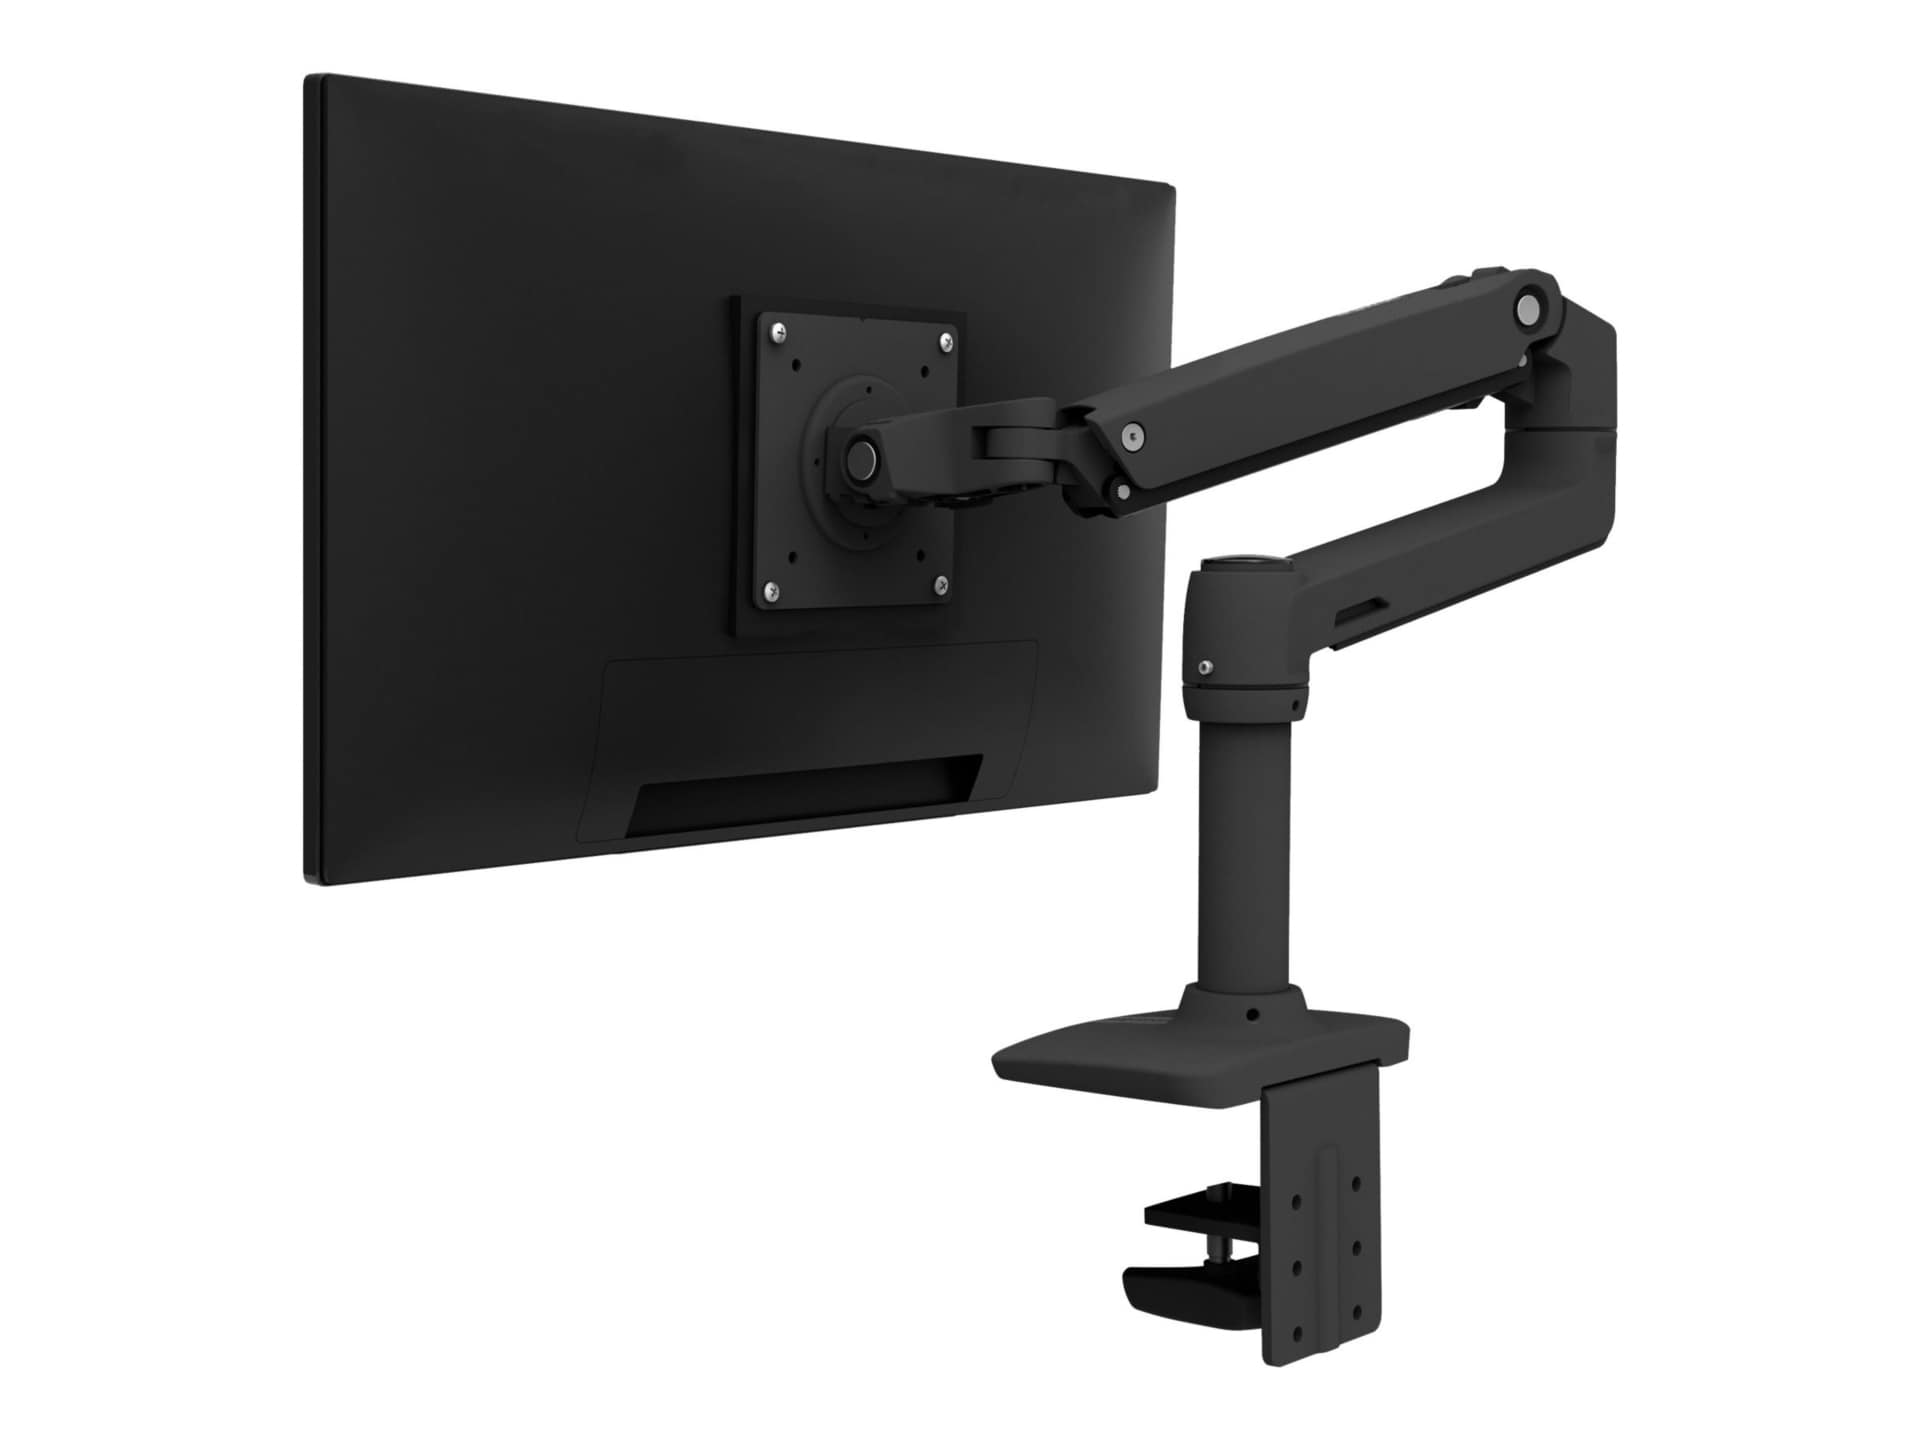 Ergotron LX mounting kit - Patented Constant Force Technology